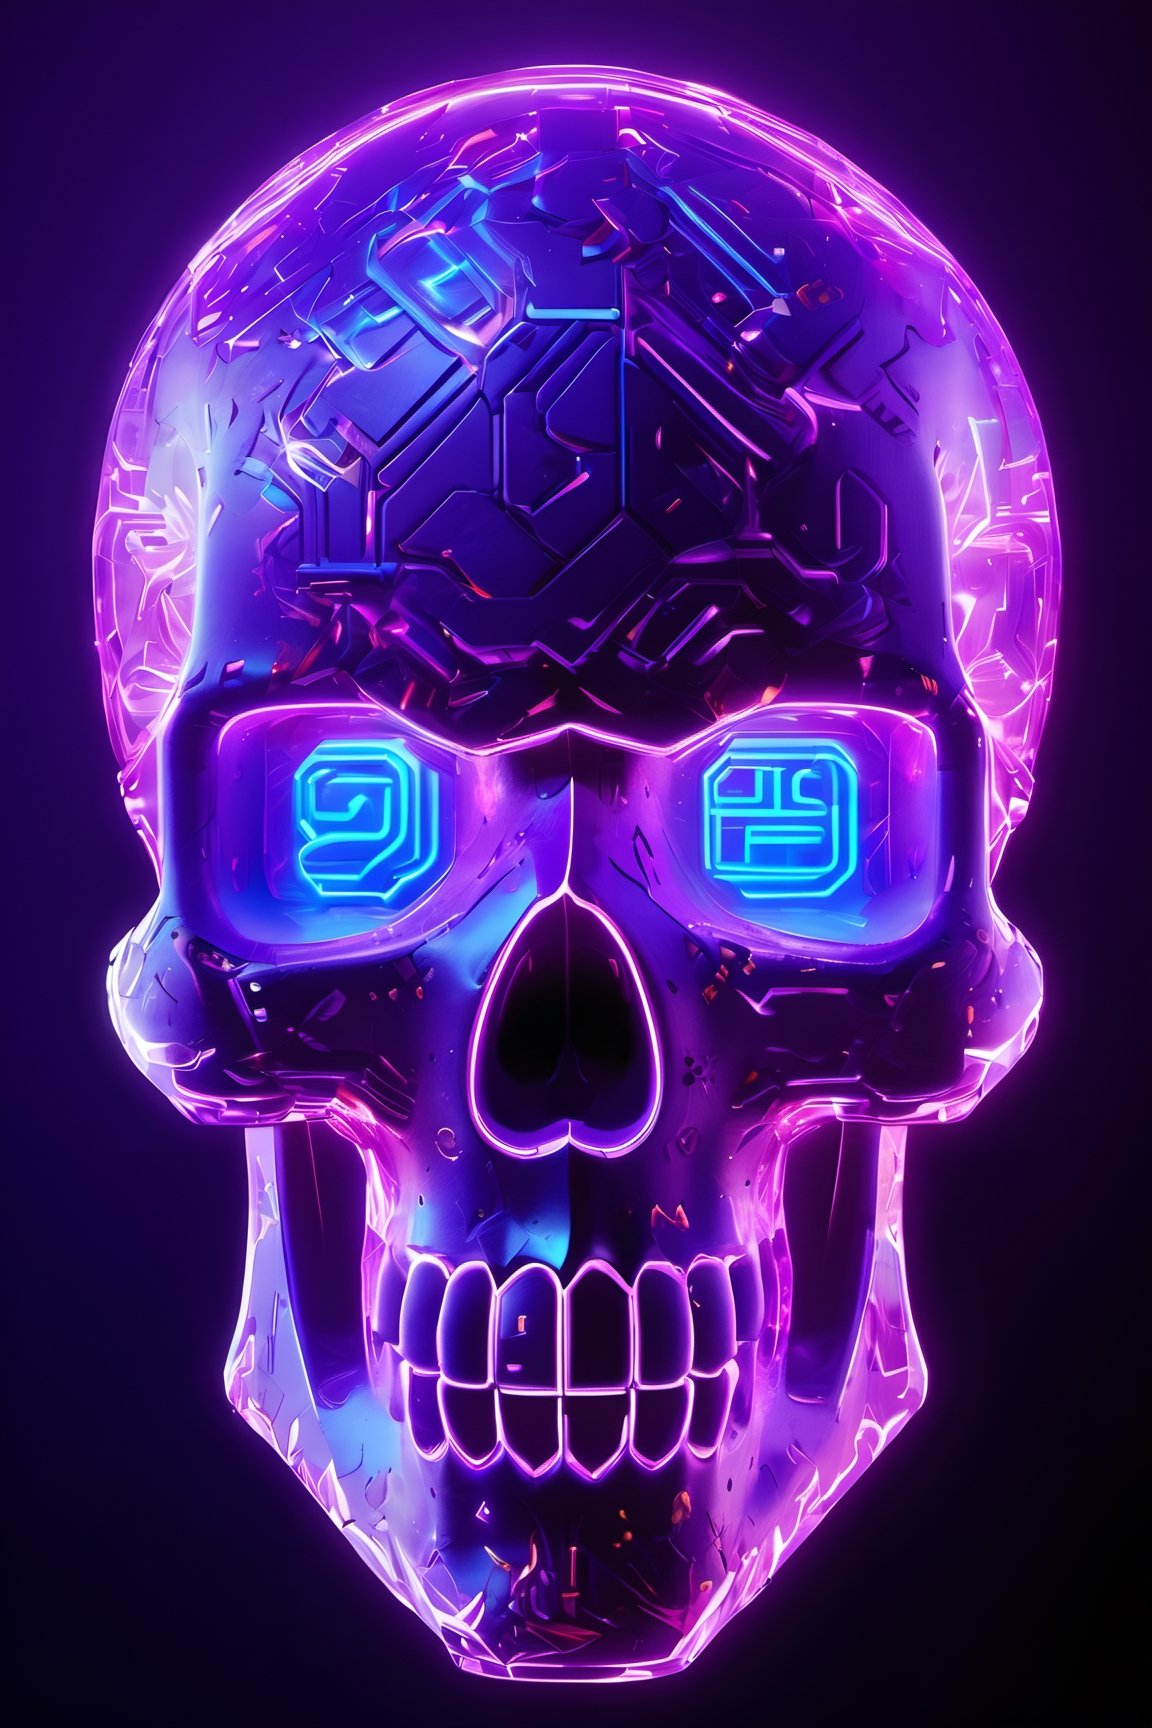 Overwatch style, A skull is made up of code characters Overwatch style. The letters glow with a range of purple and purple colors, as if they have been taken from a digital world. The light and color shines and moves across the surface of the skull, giving the figure an almost hypnotic appearance.